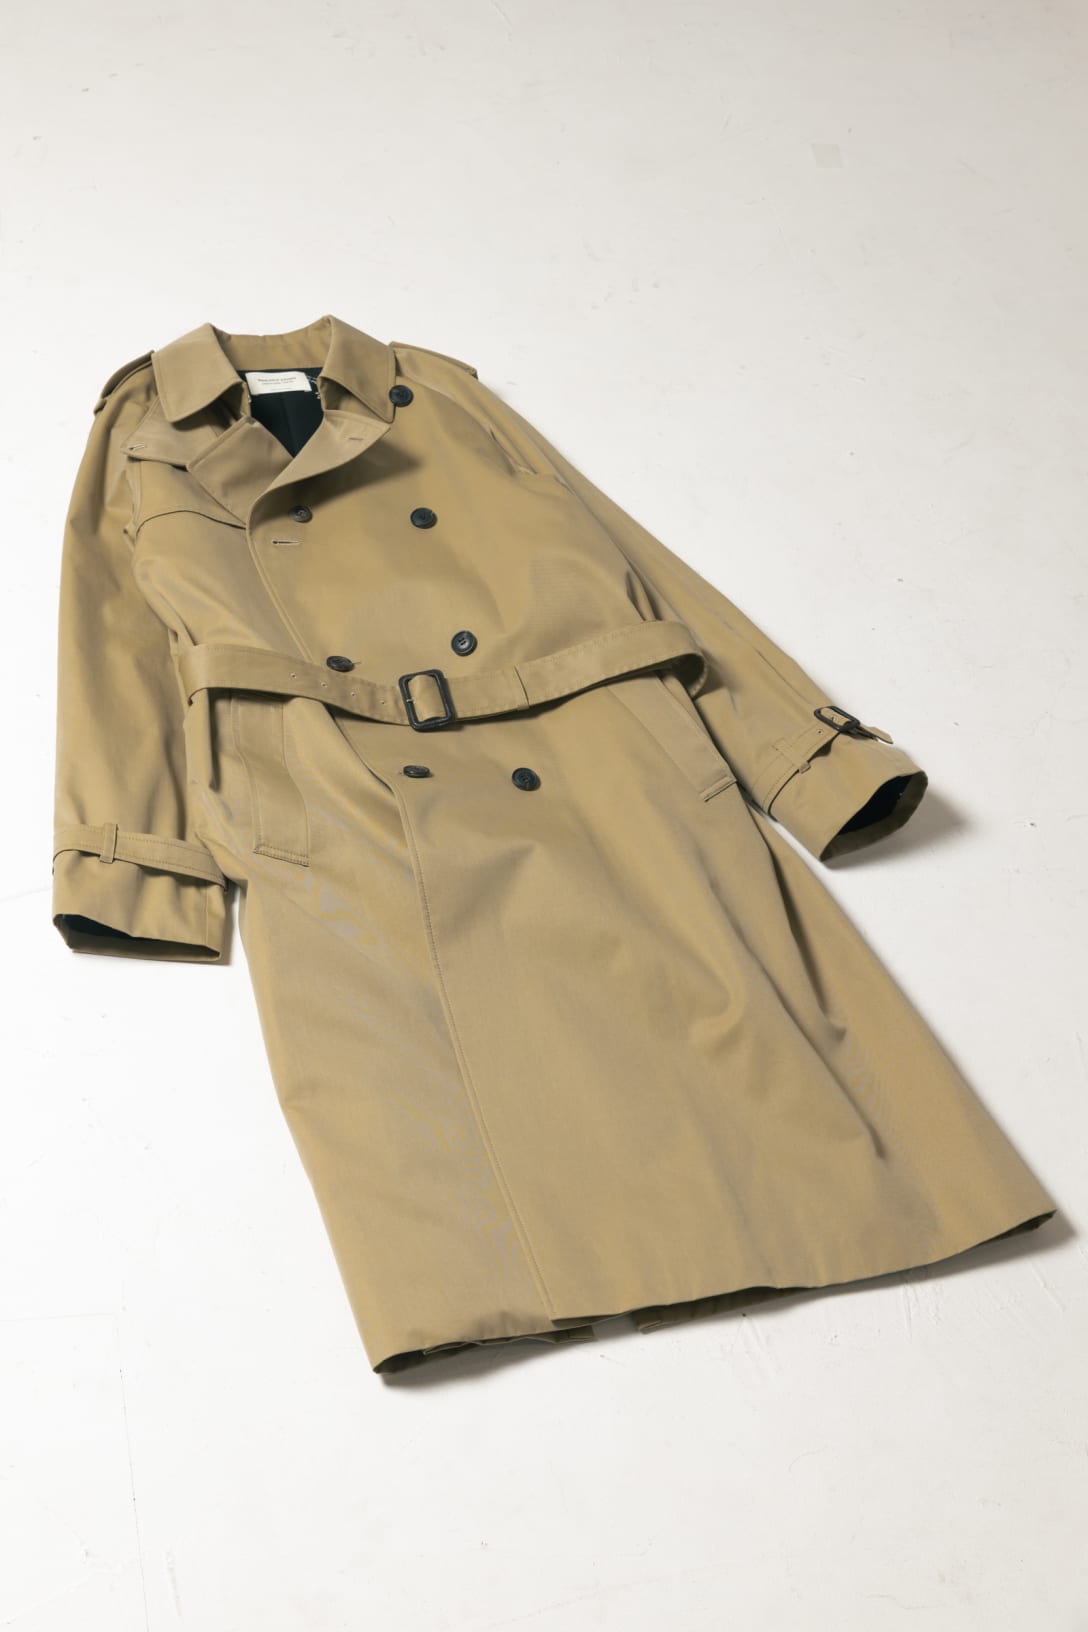 ultimate pima THE / a trench coat（税込14万9600円） Image by FASHIONSNAP